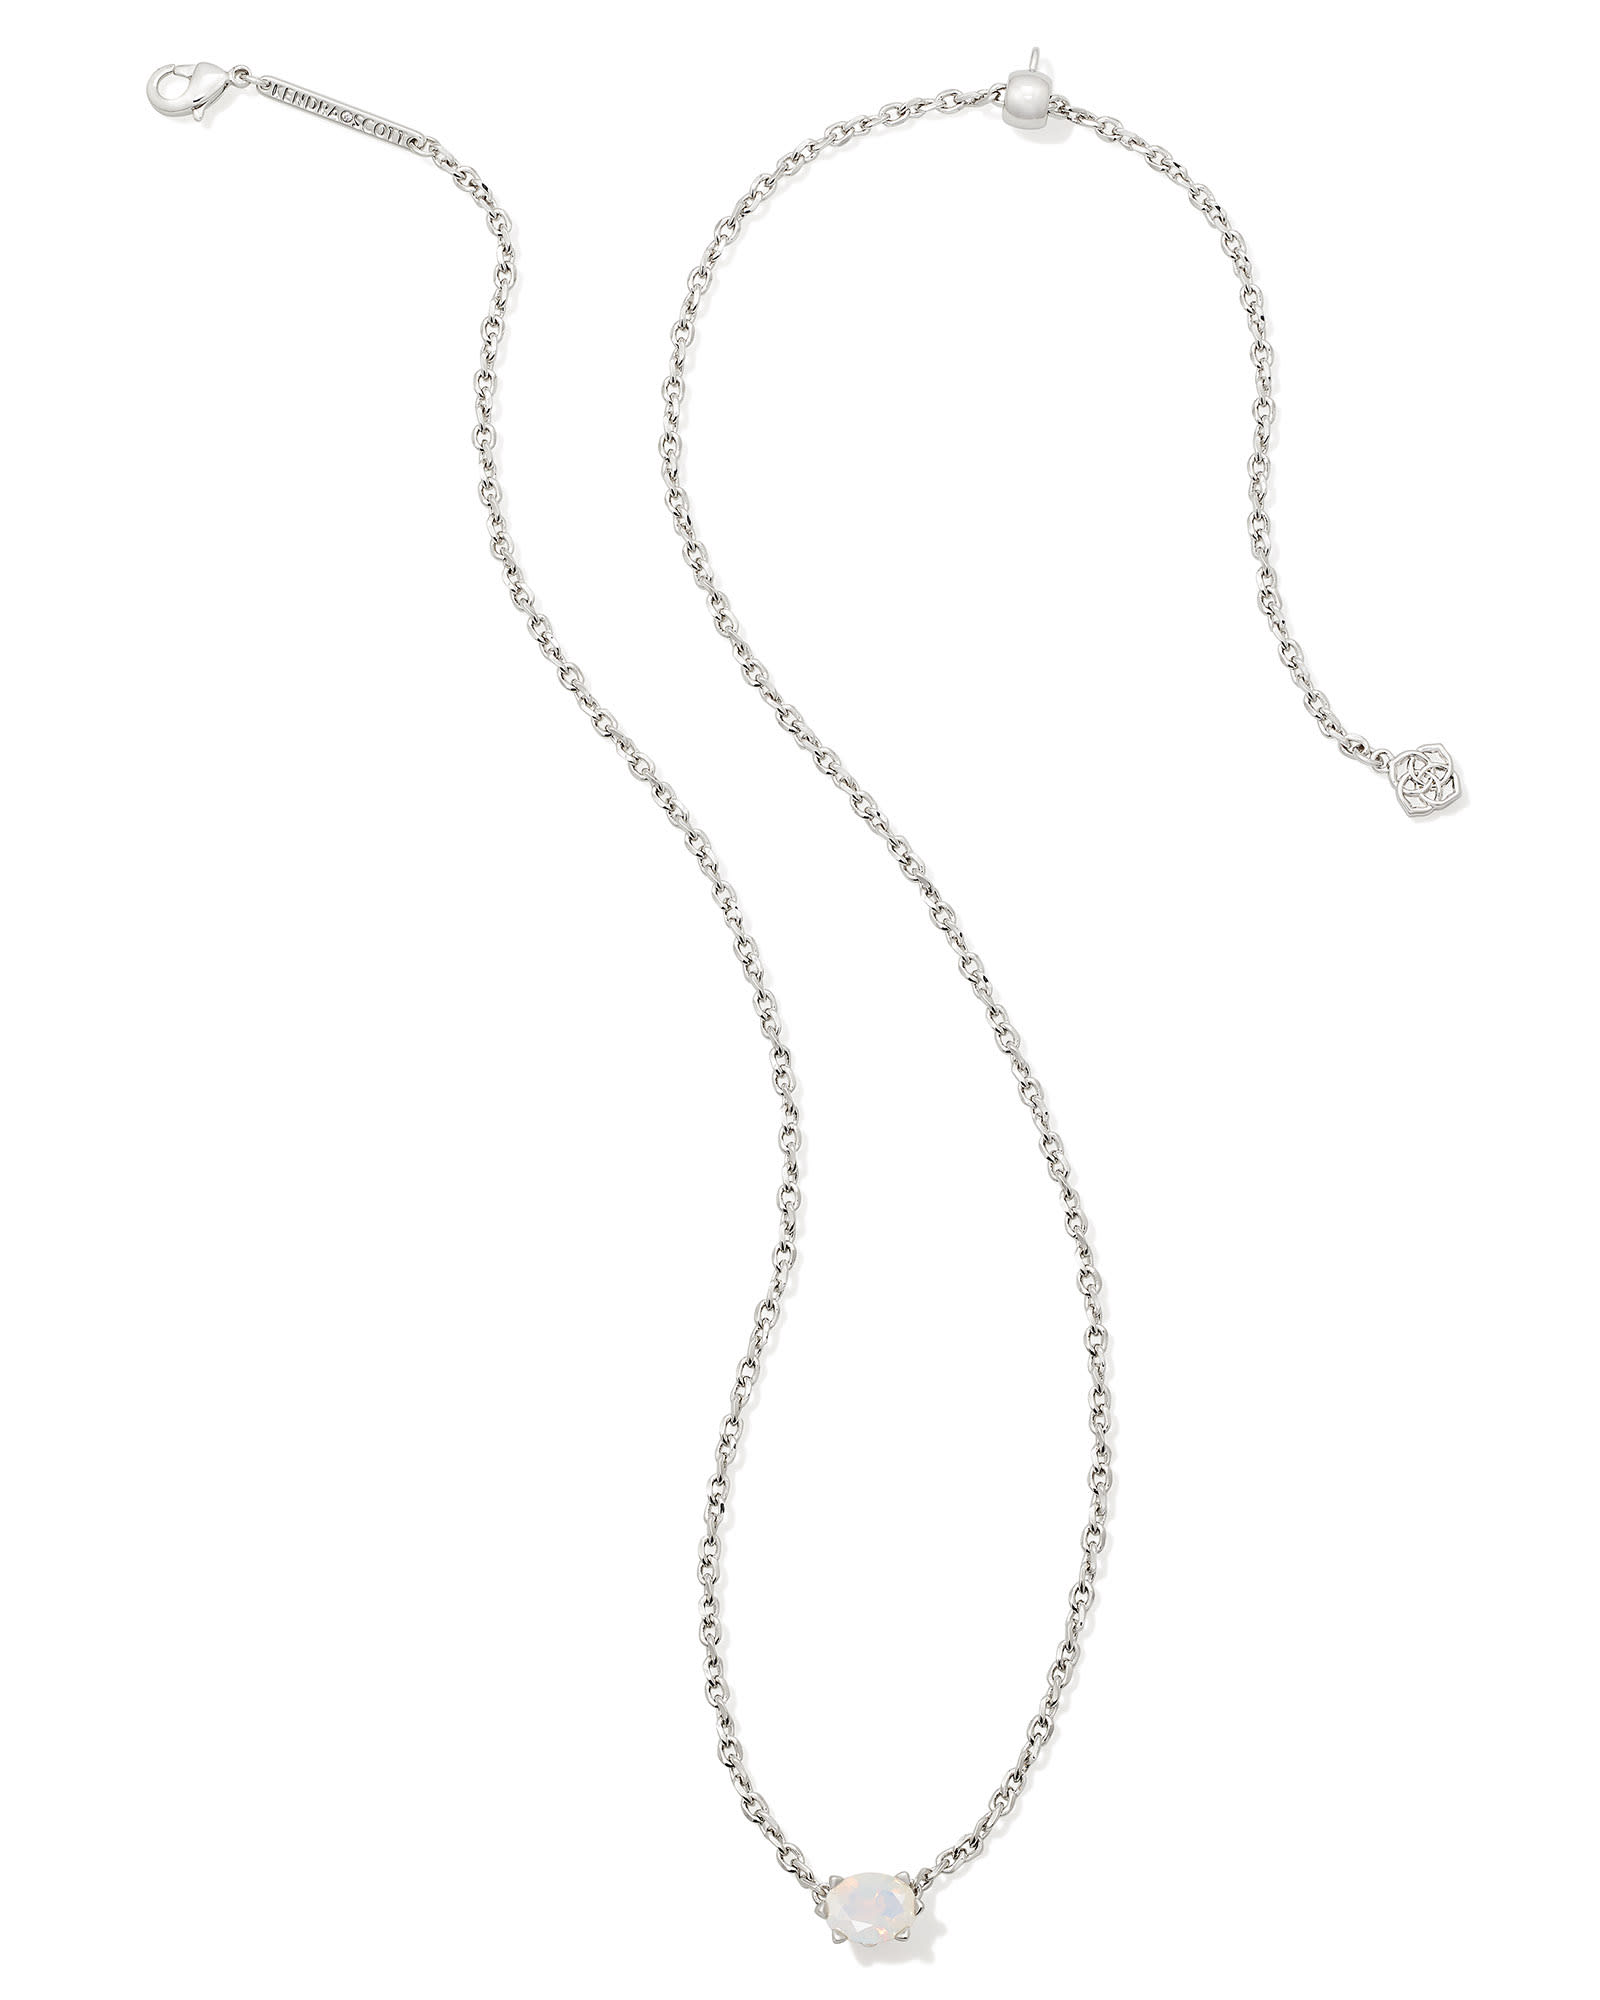 Cailin Silver Pendant Necklace in Champagne Opal Crystal